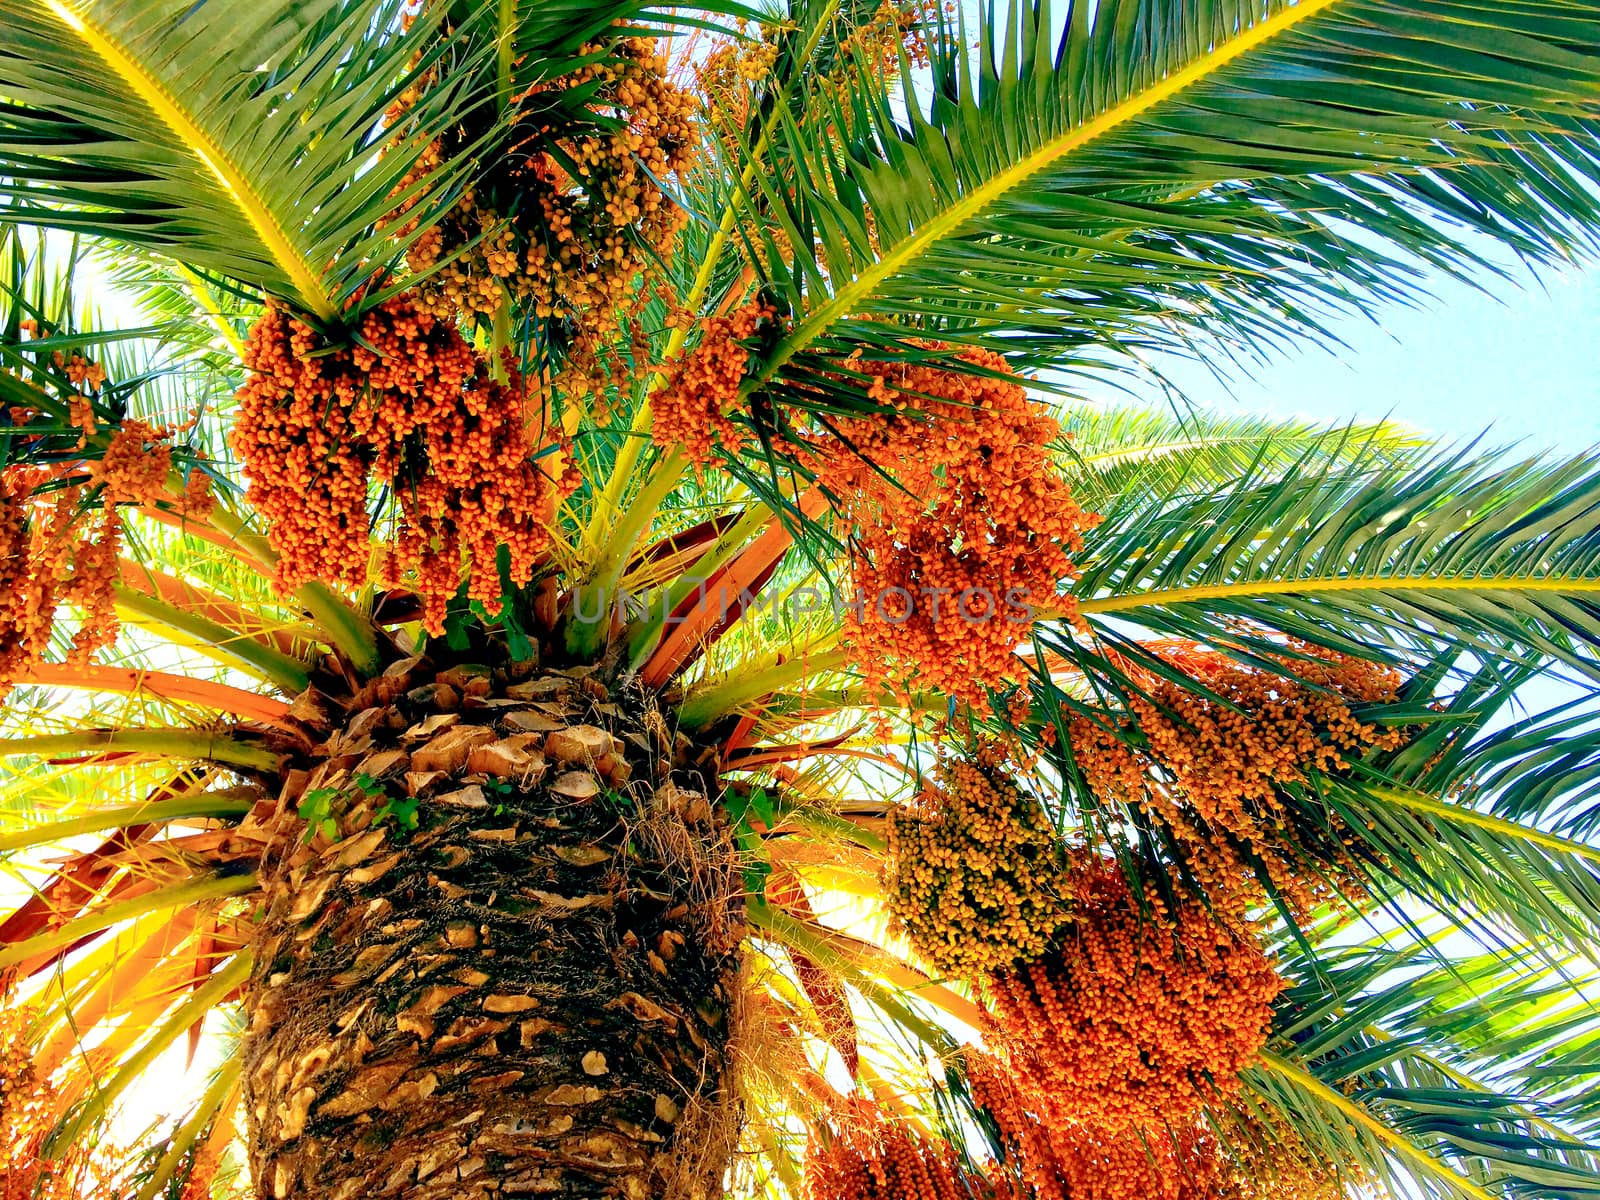 Vibrant tropical palm tree with orange fruits.